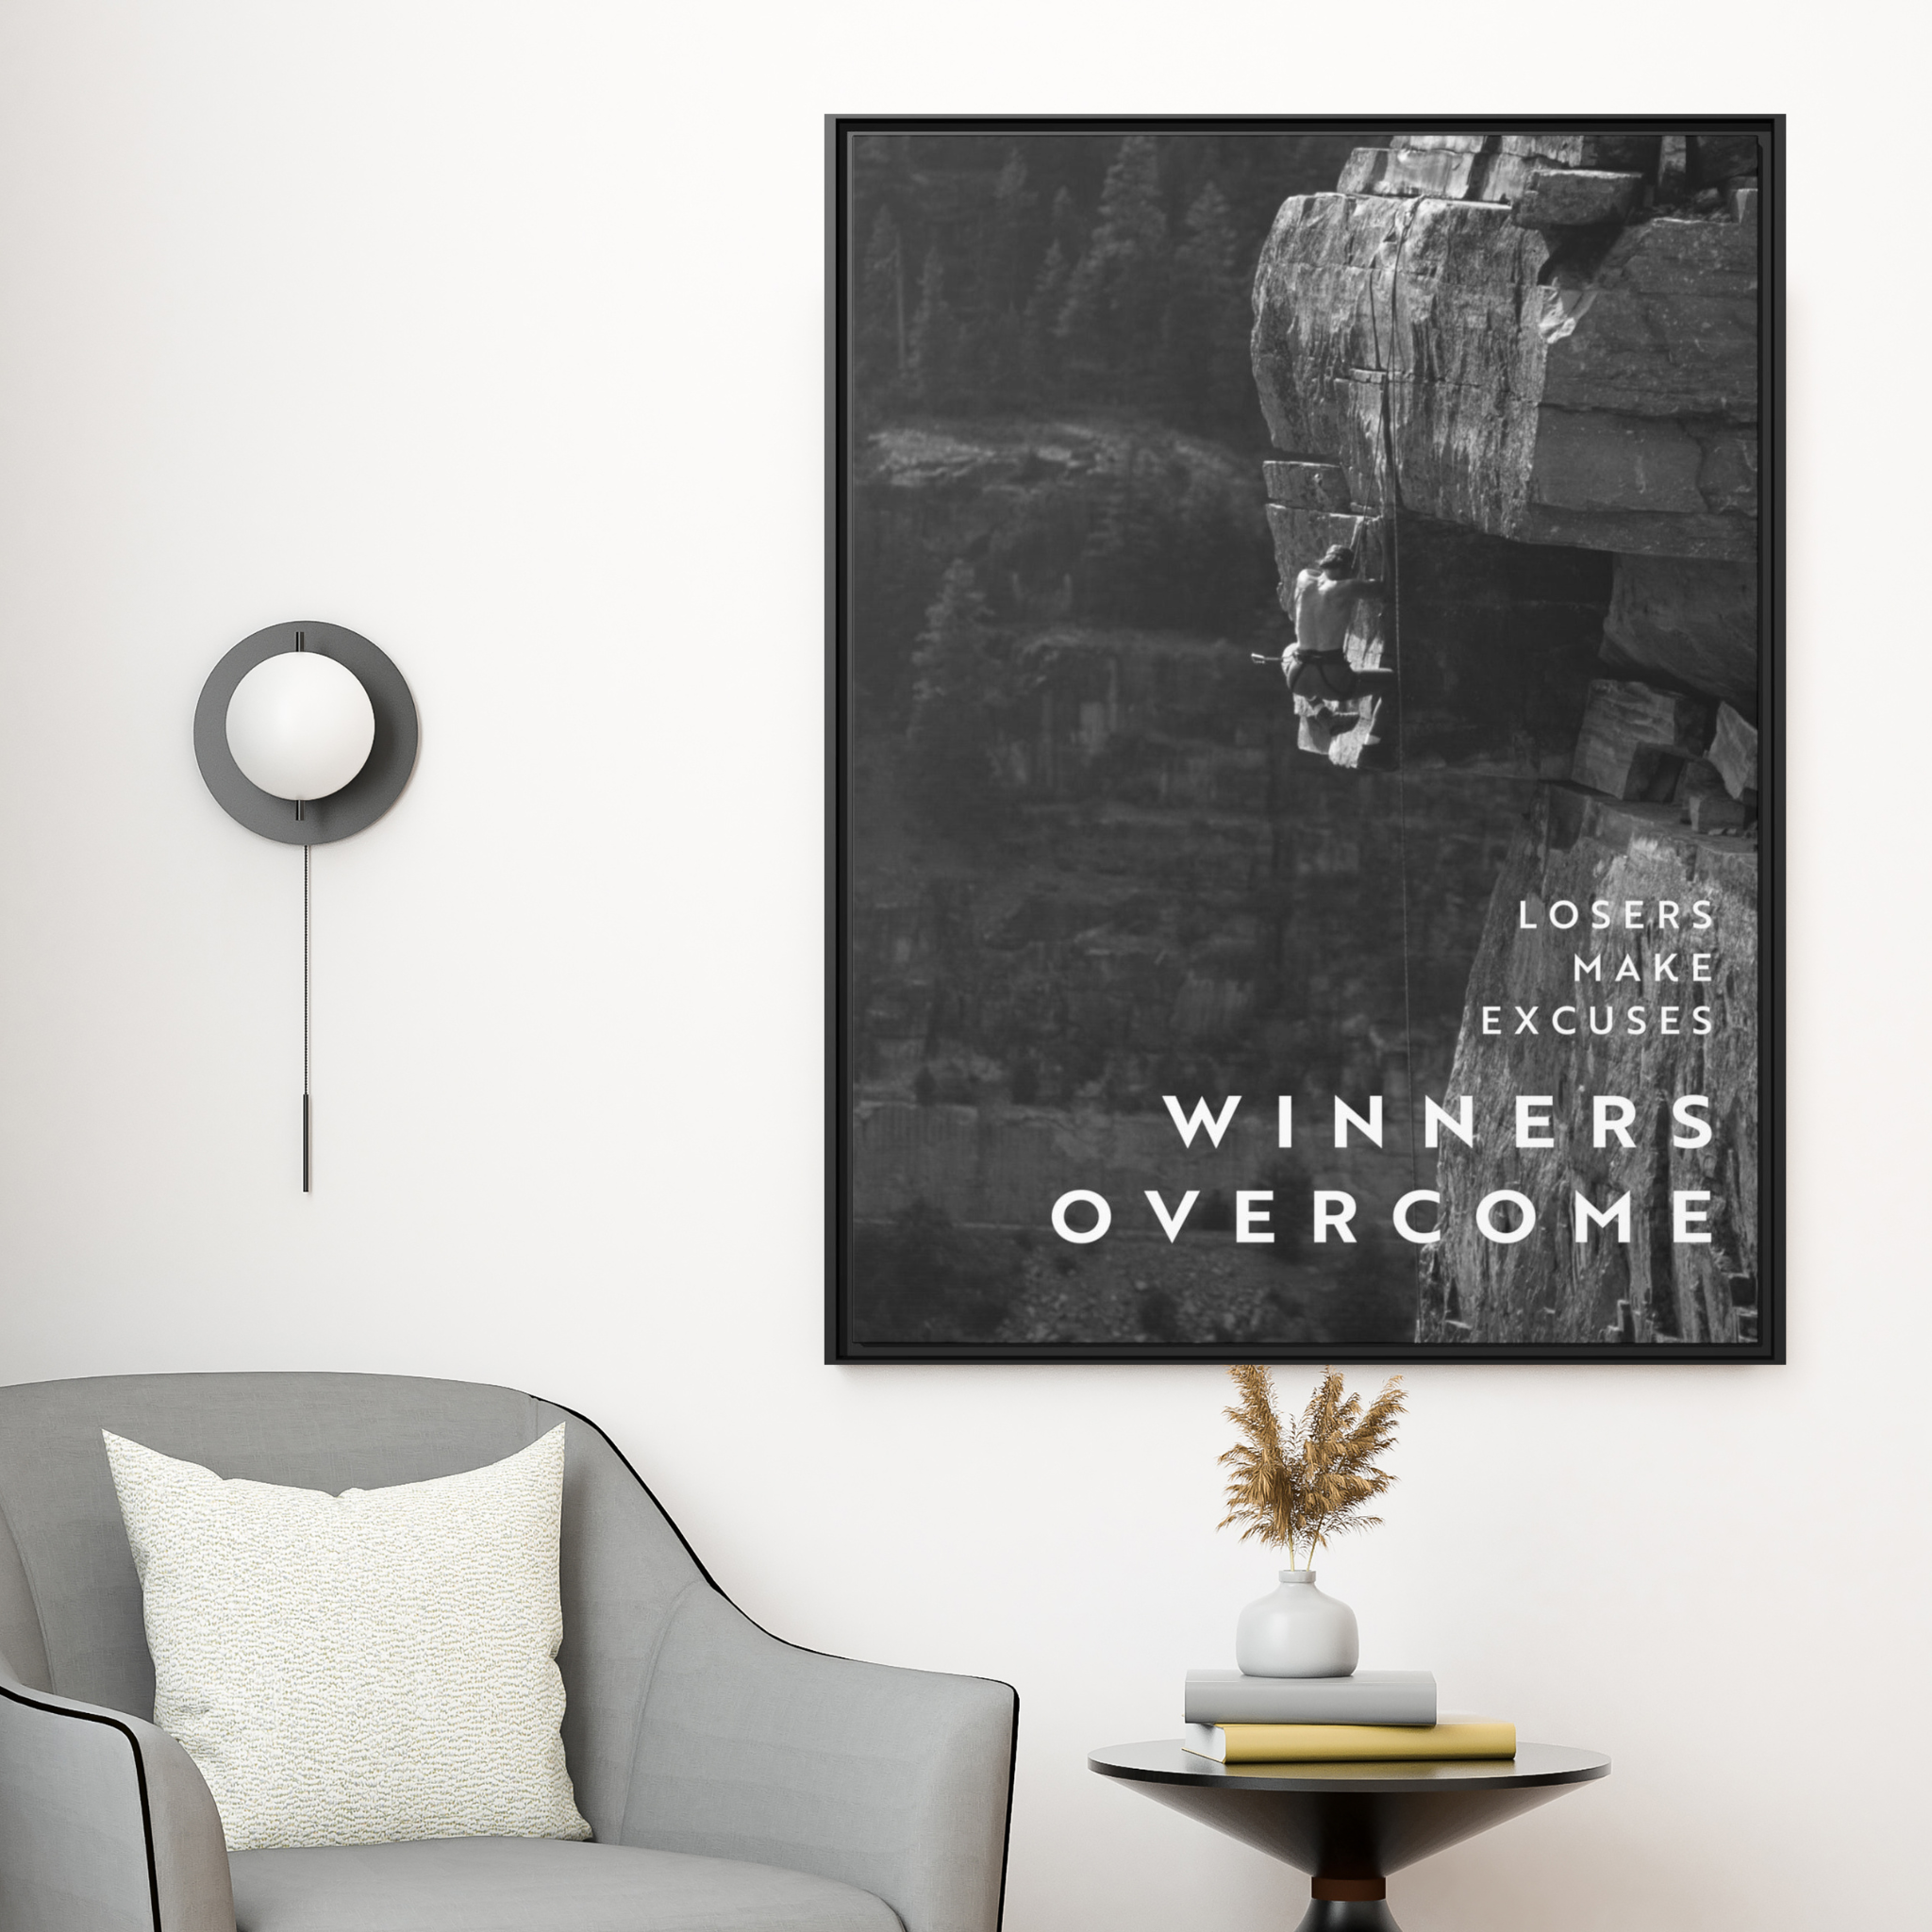 Winners Overcome - Black And White - Wall Art additional image 1